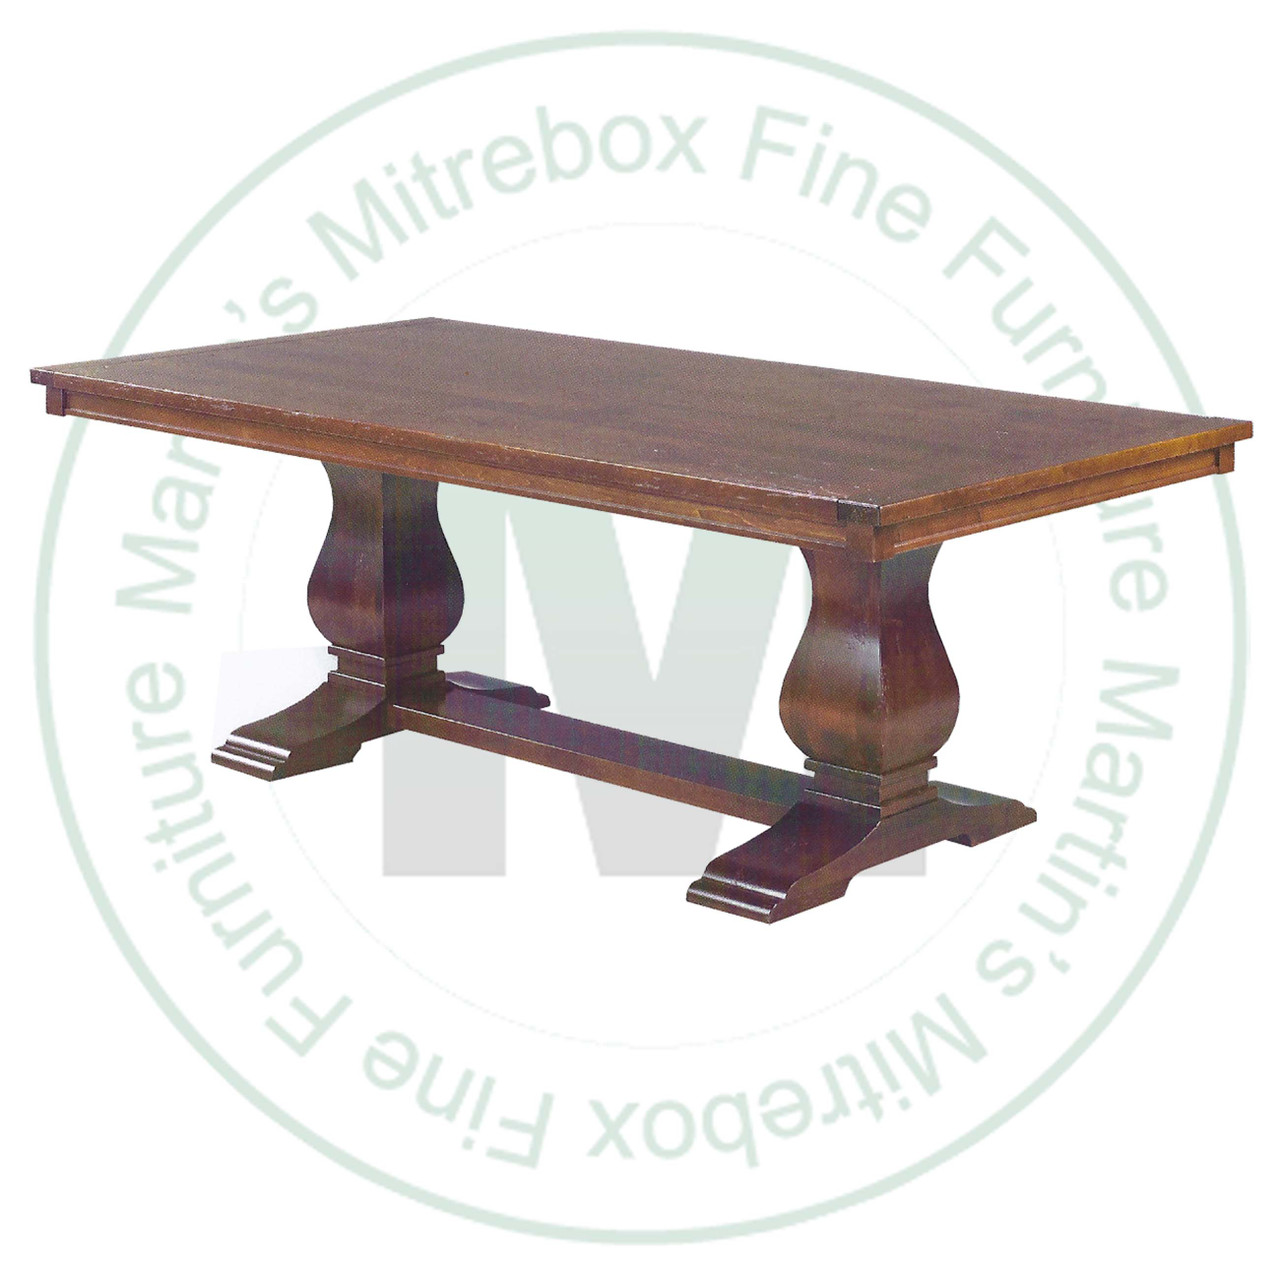 Oak Socrates Double Pedestal Table 48''D x 96''W x 30''H With 3 - 12'' Leaves. Table Has 1.25'' Thick Top